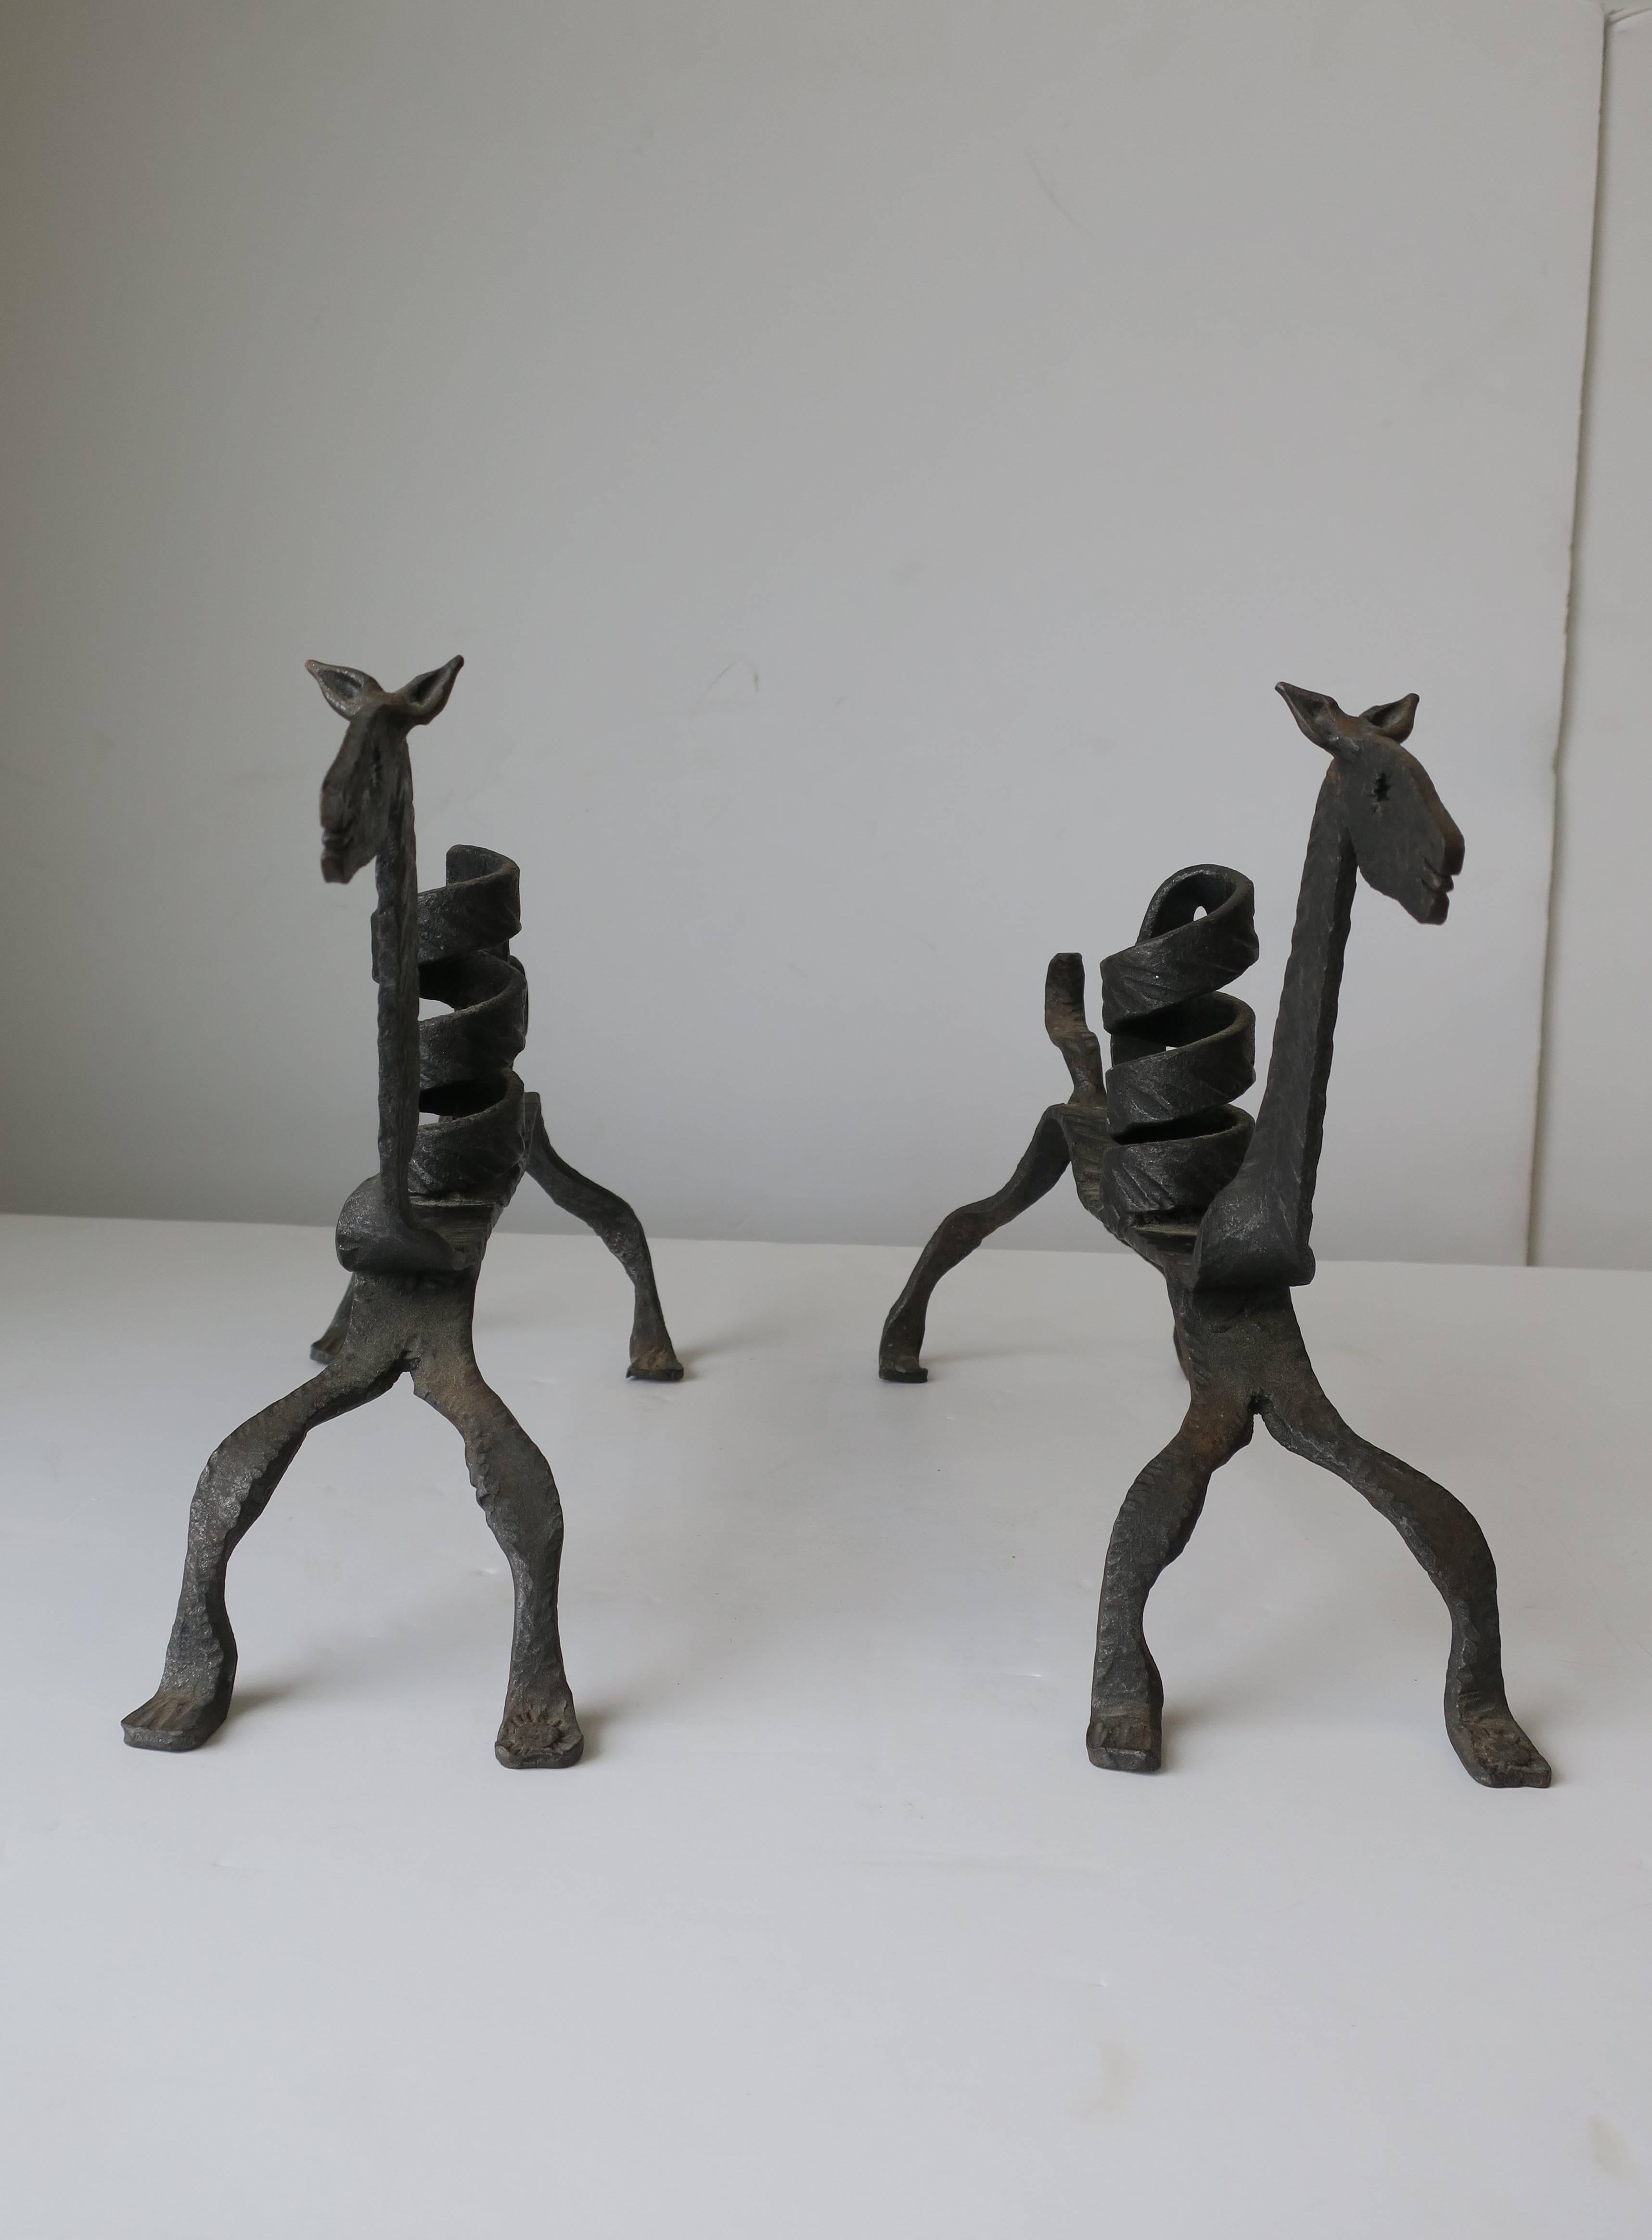 20th Century Iron Horse Sculptures Candlestick Holders from Spain, Pair